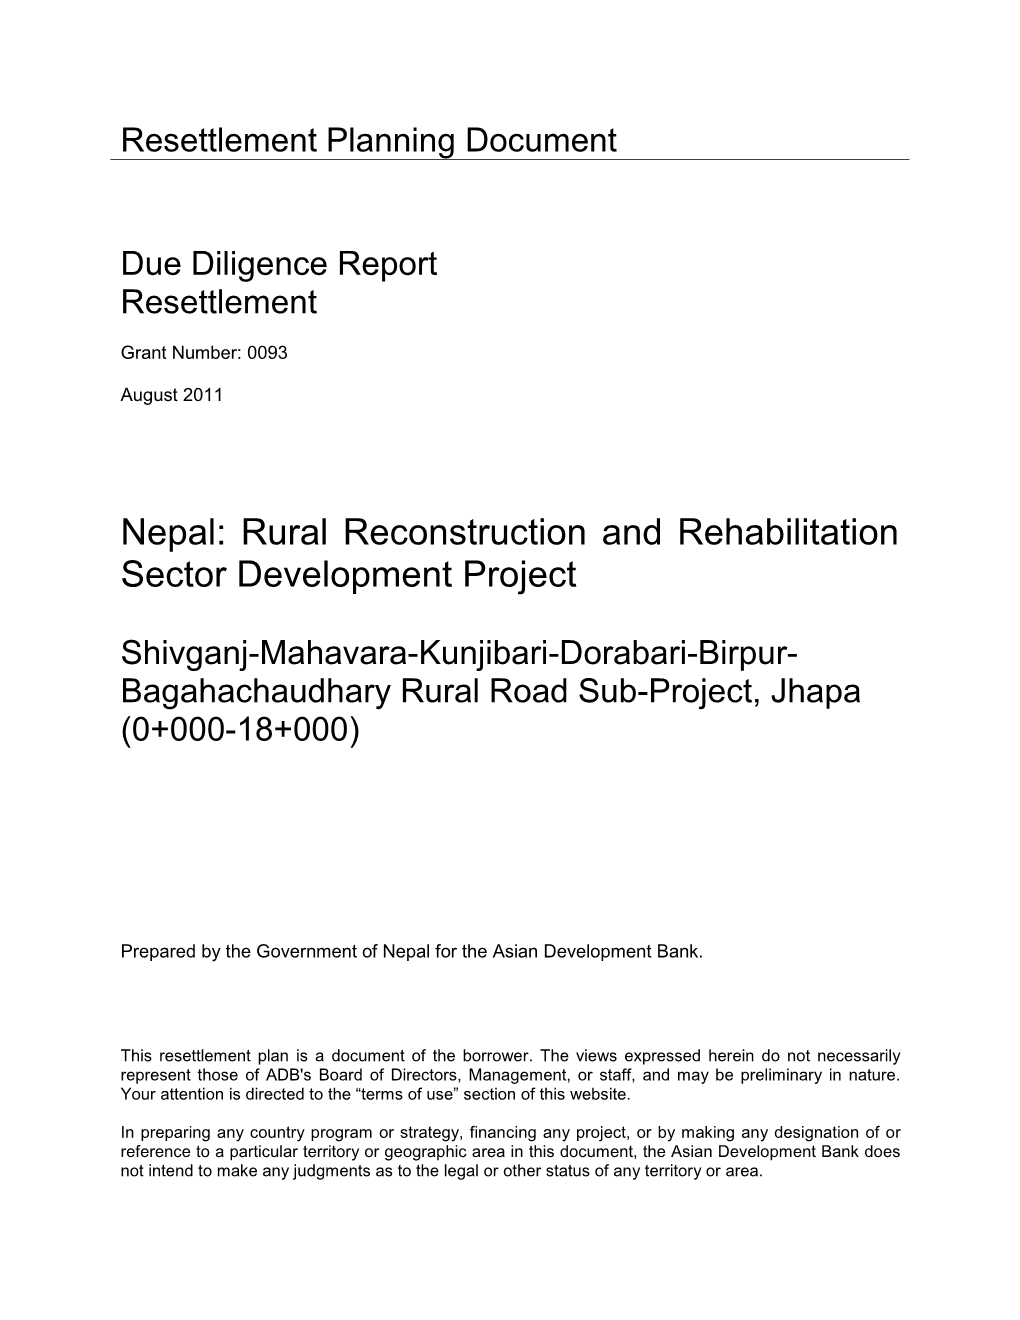 Nepal: Rural Reconstruction and Rehabilitation Sector Development Project